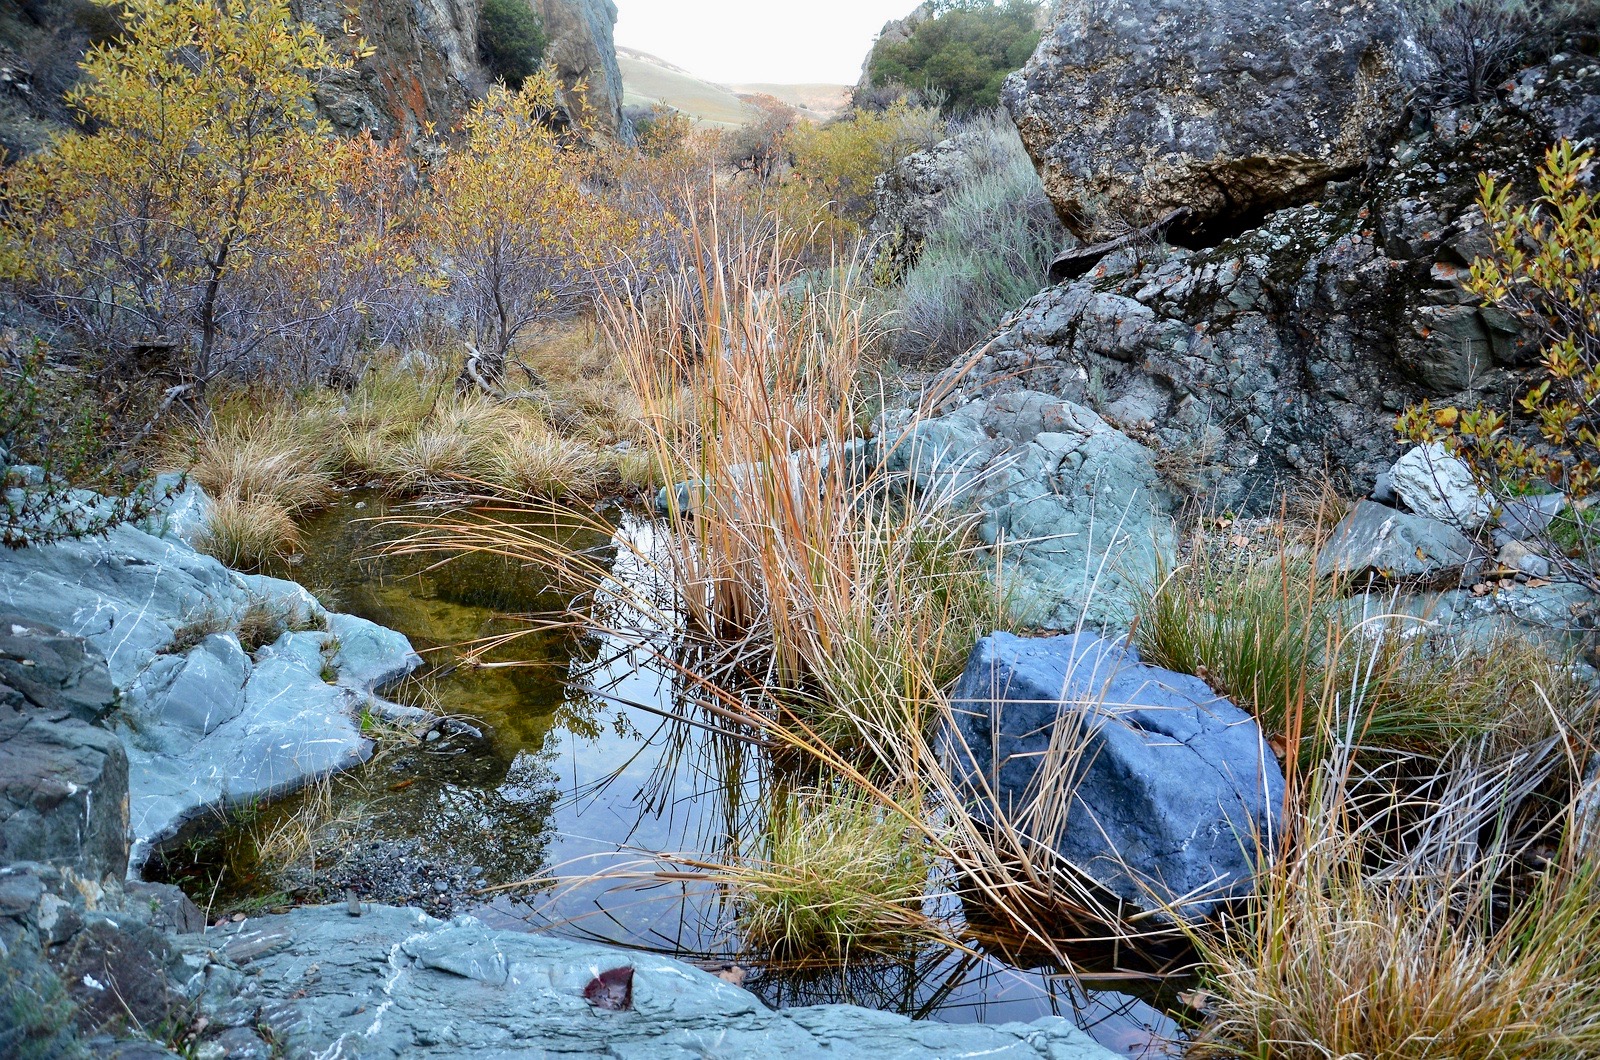 An image of trees, stones, and reeds in a shallow pond in Corral Hollow in Tesla Park